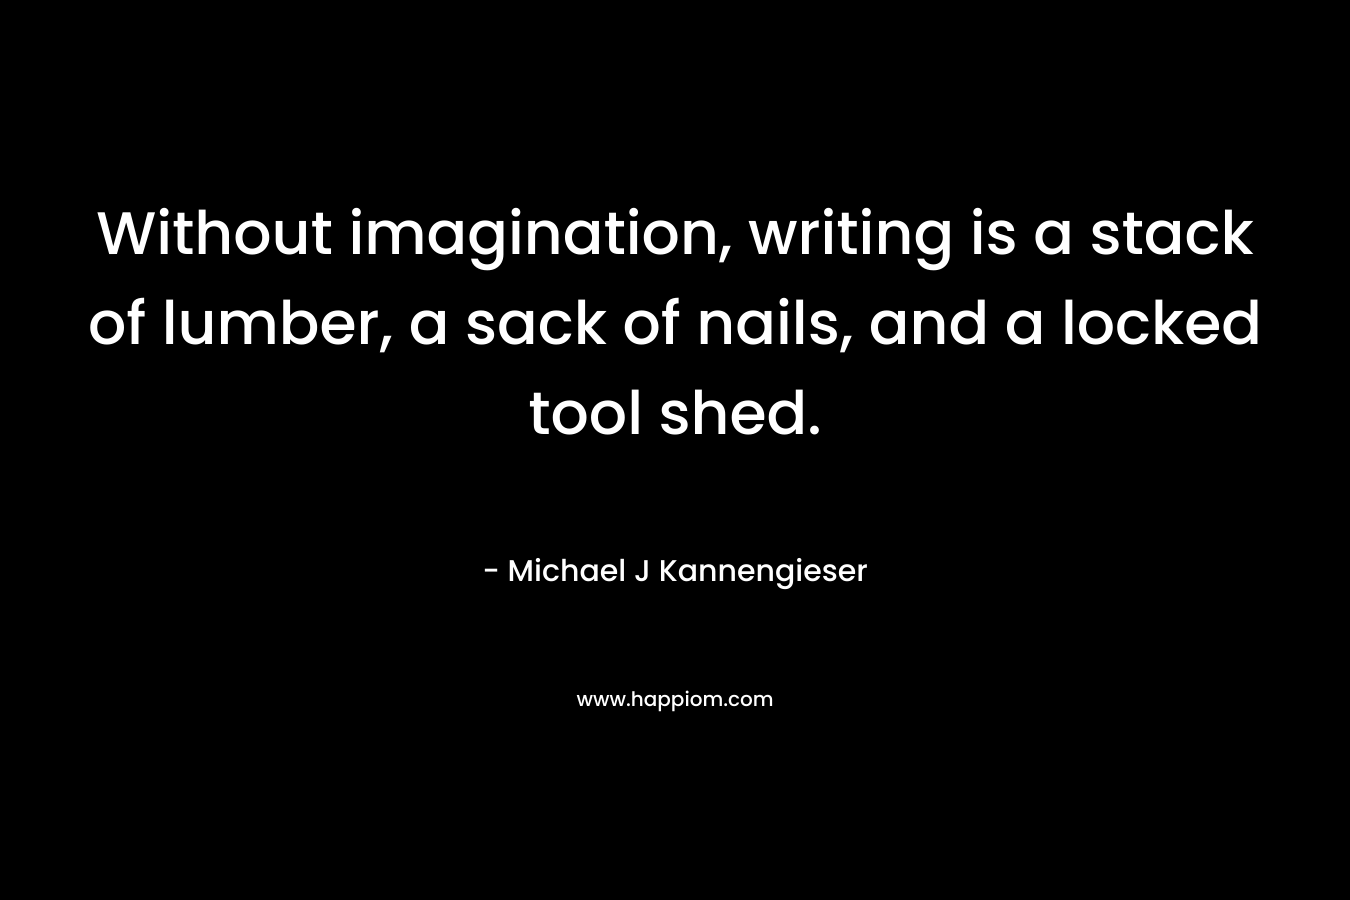 Without imagination, writing is a stack of lumber, a sack of nails, and a locked tool shed. – Michael J Kannengieser